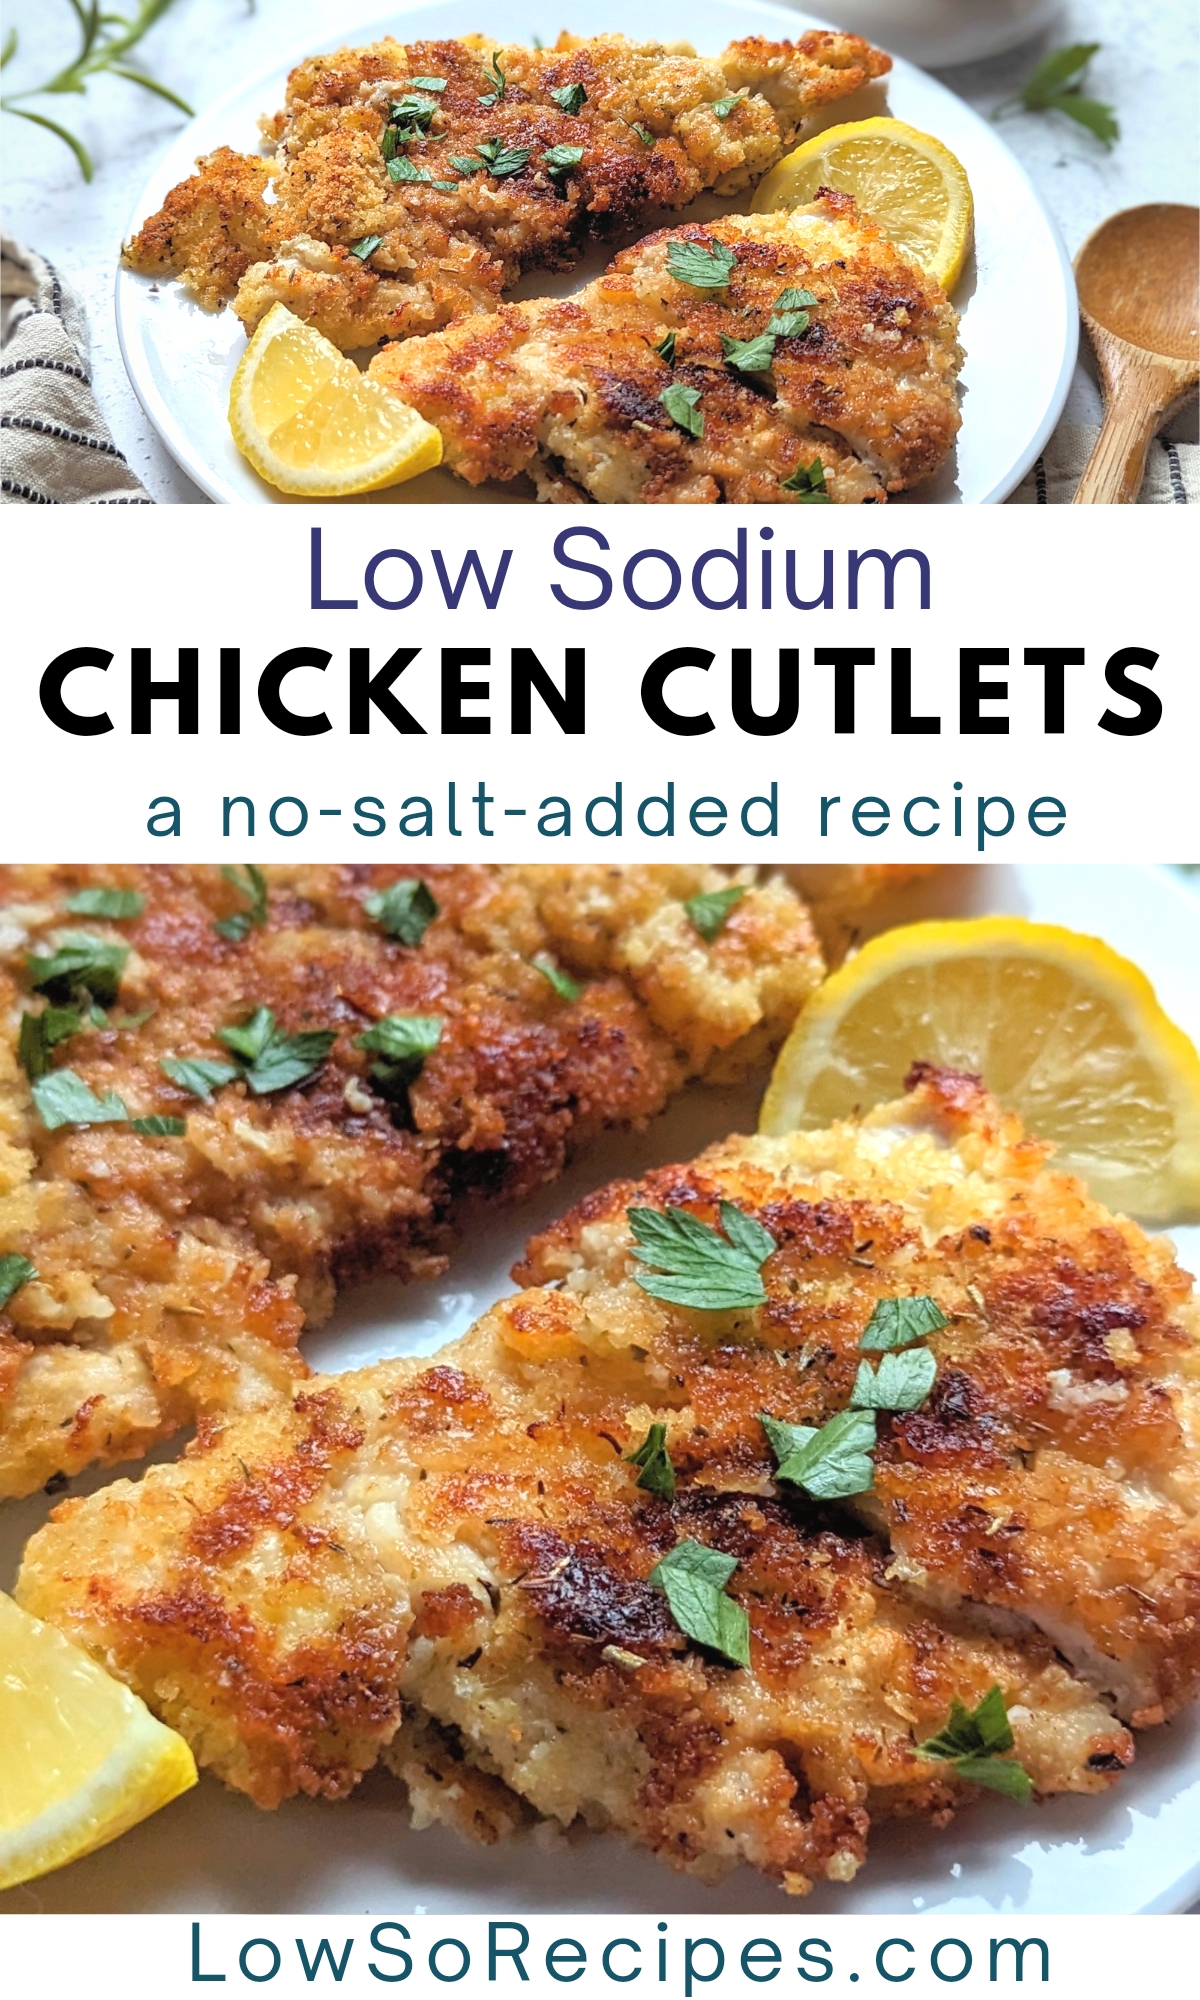 low sodium chicken cutlets recipe a no salt added dinner idea with chicken and breadcrumbs.